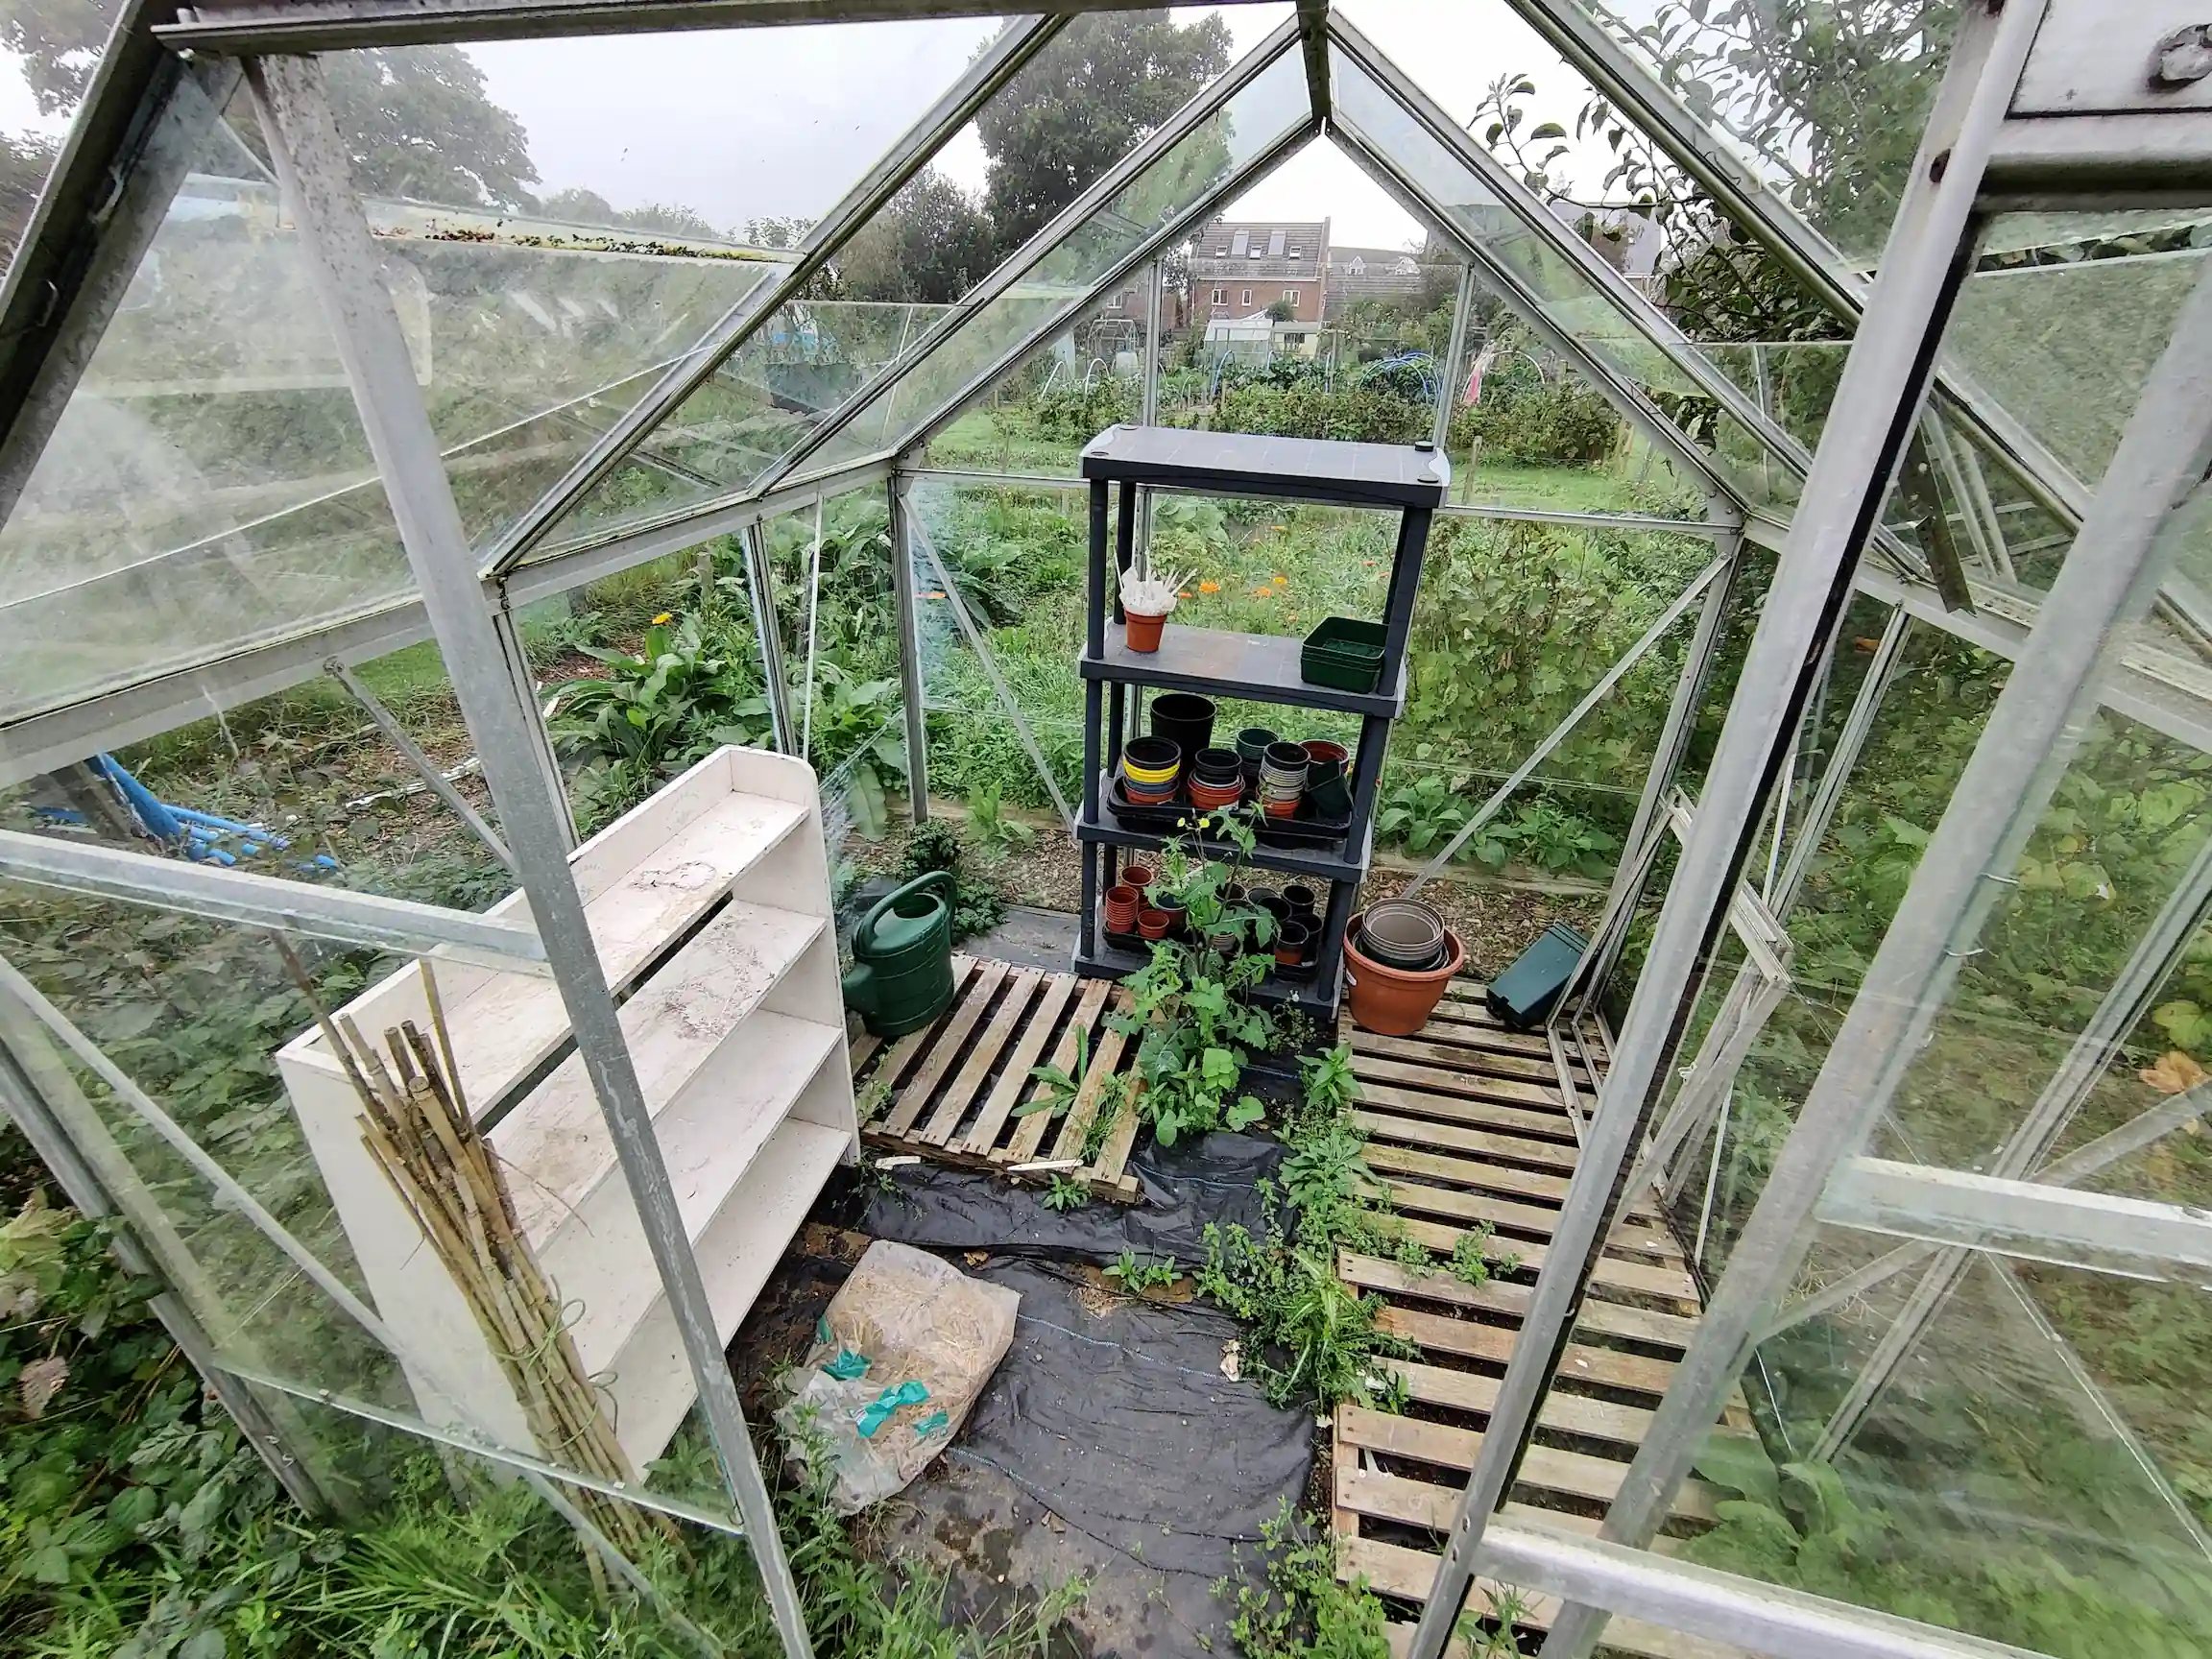 Looking inside a greenhouse, with a few roof glass panes missing, and weeds growing along the floor